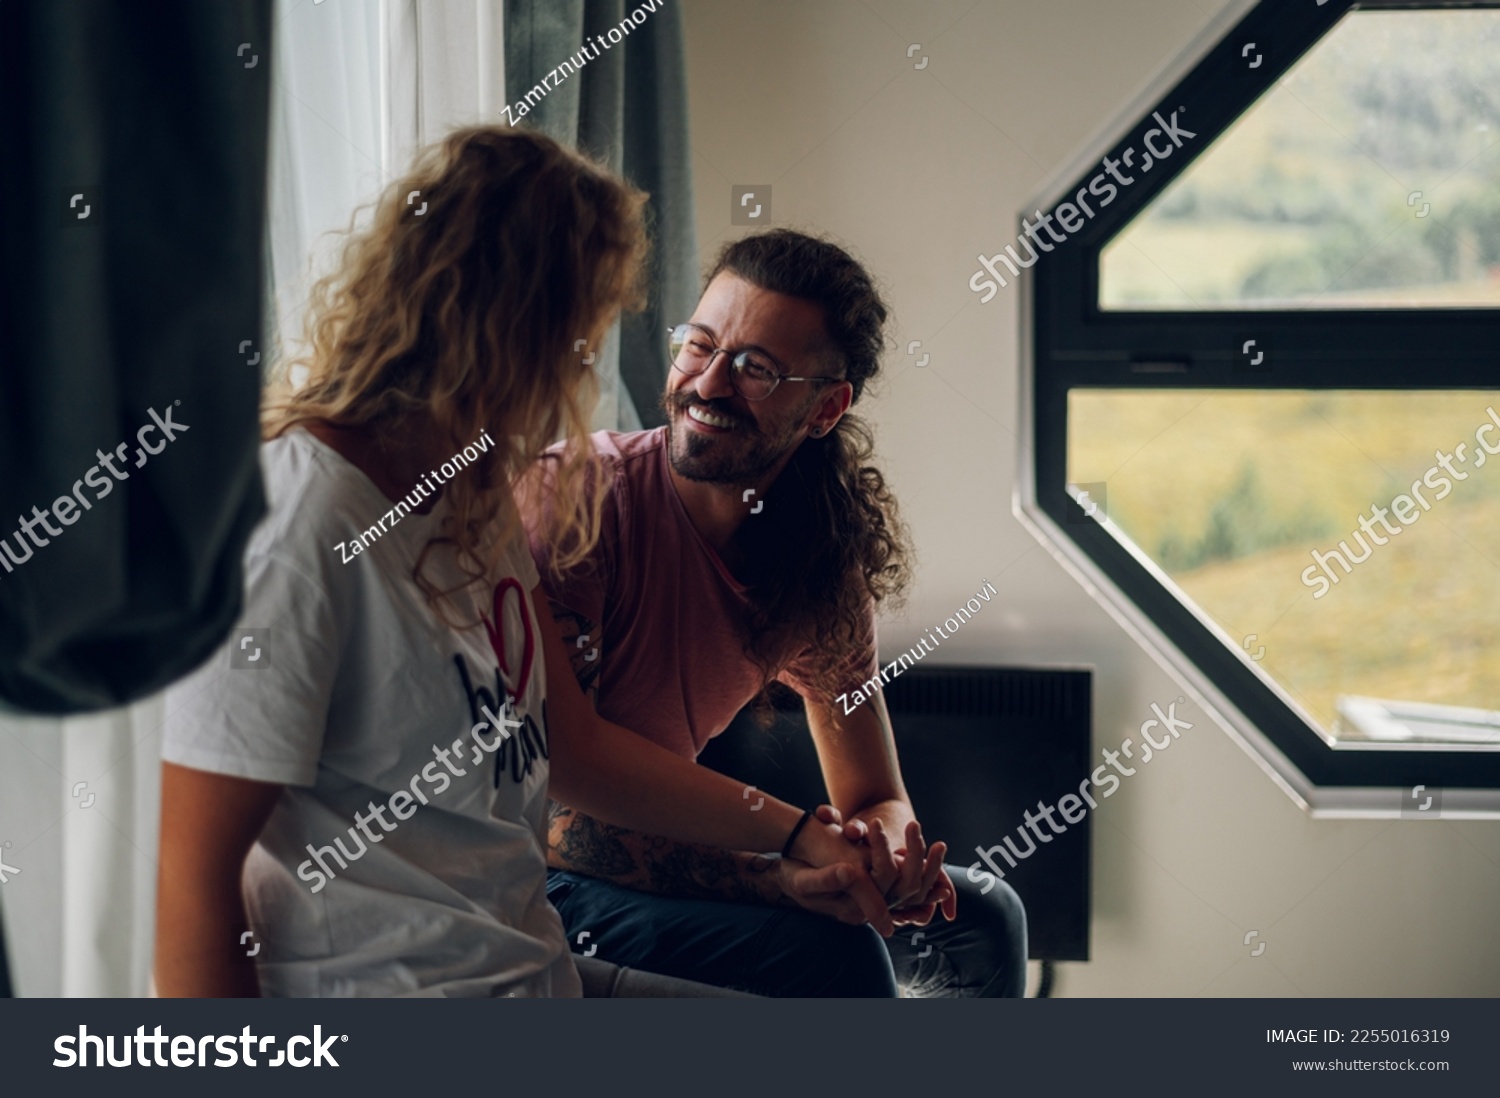 Young couple having fun together at home. Focus on a man holding his girlfriend hands while looking at her and smiling. Adult people relationship and romance. Copy space. #2255016319